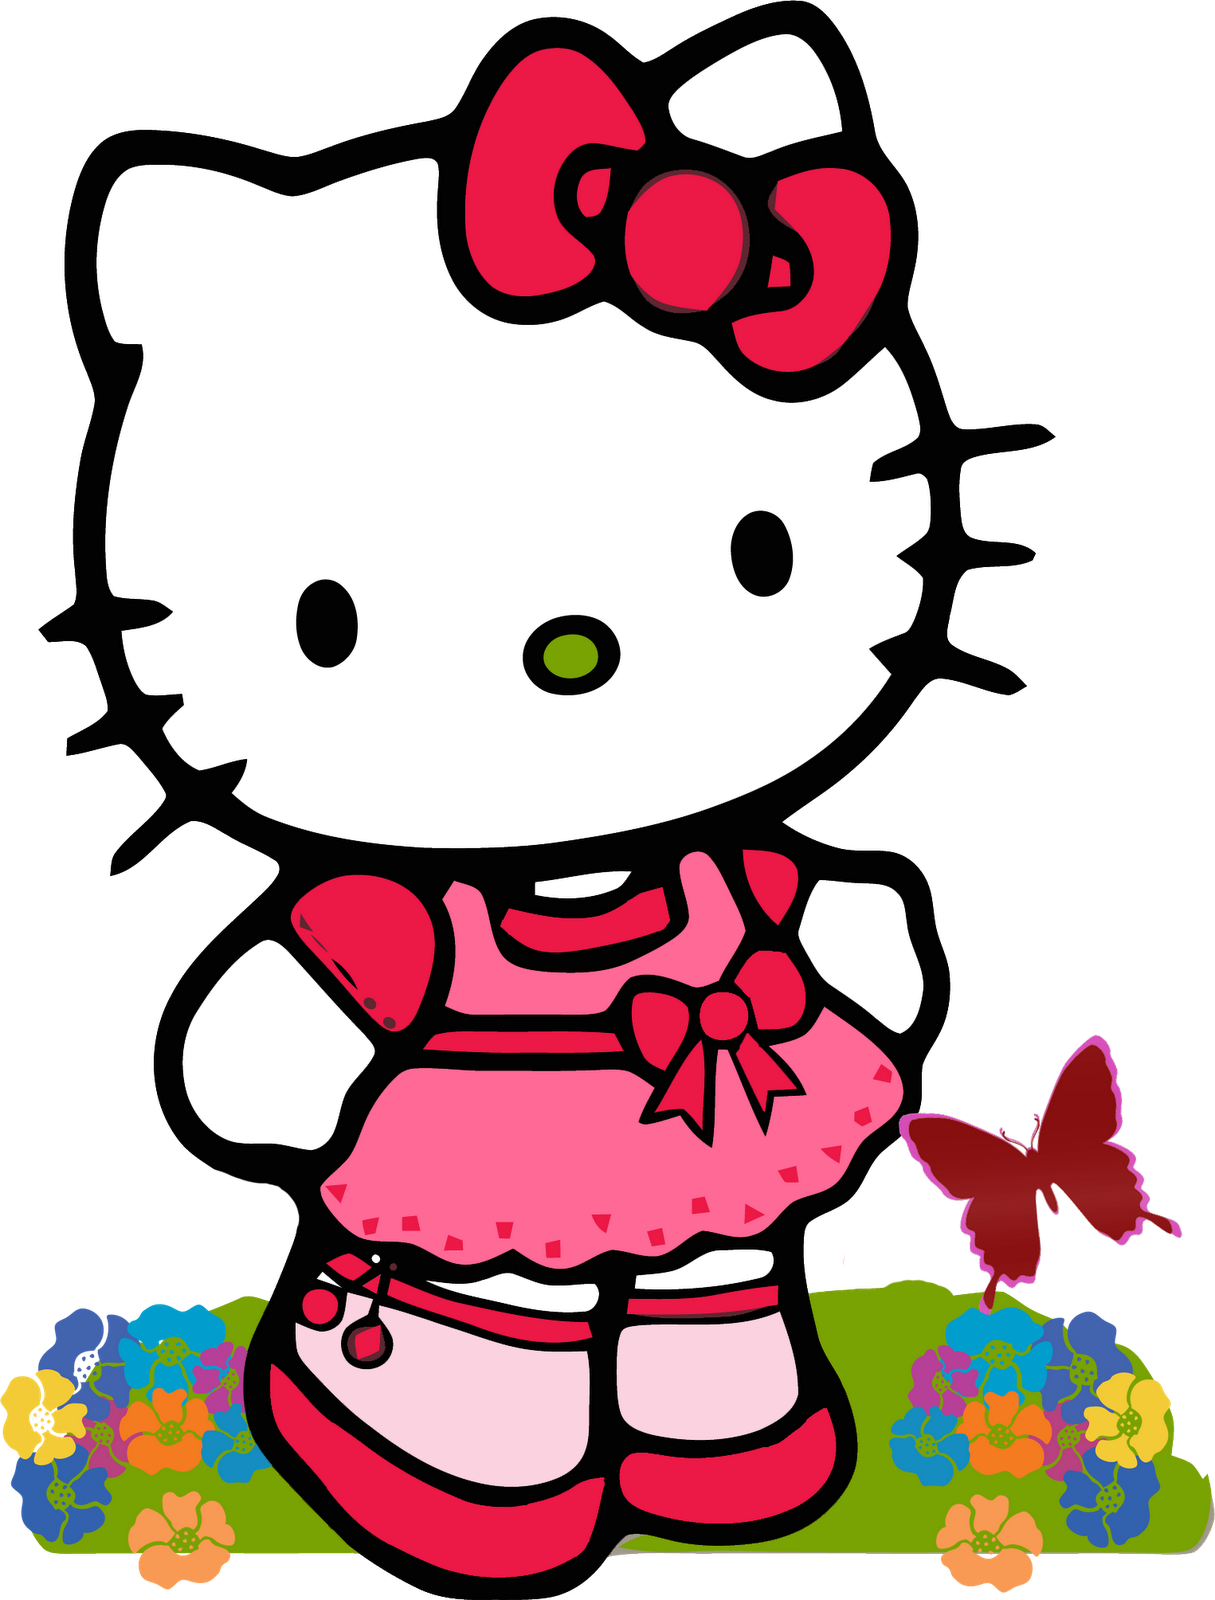 Kitty images clipart images gallery for free download.